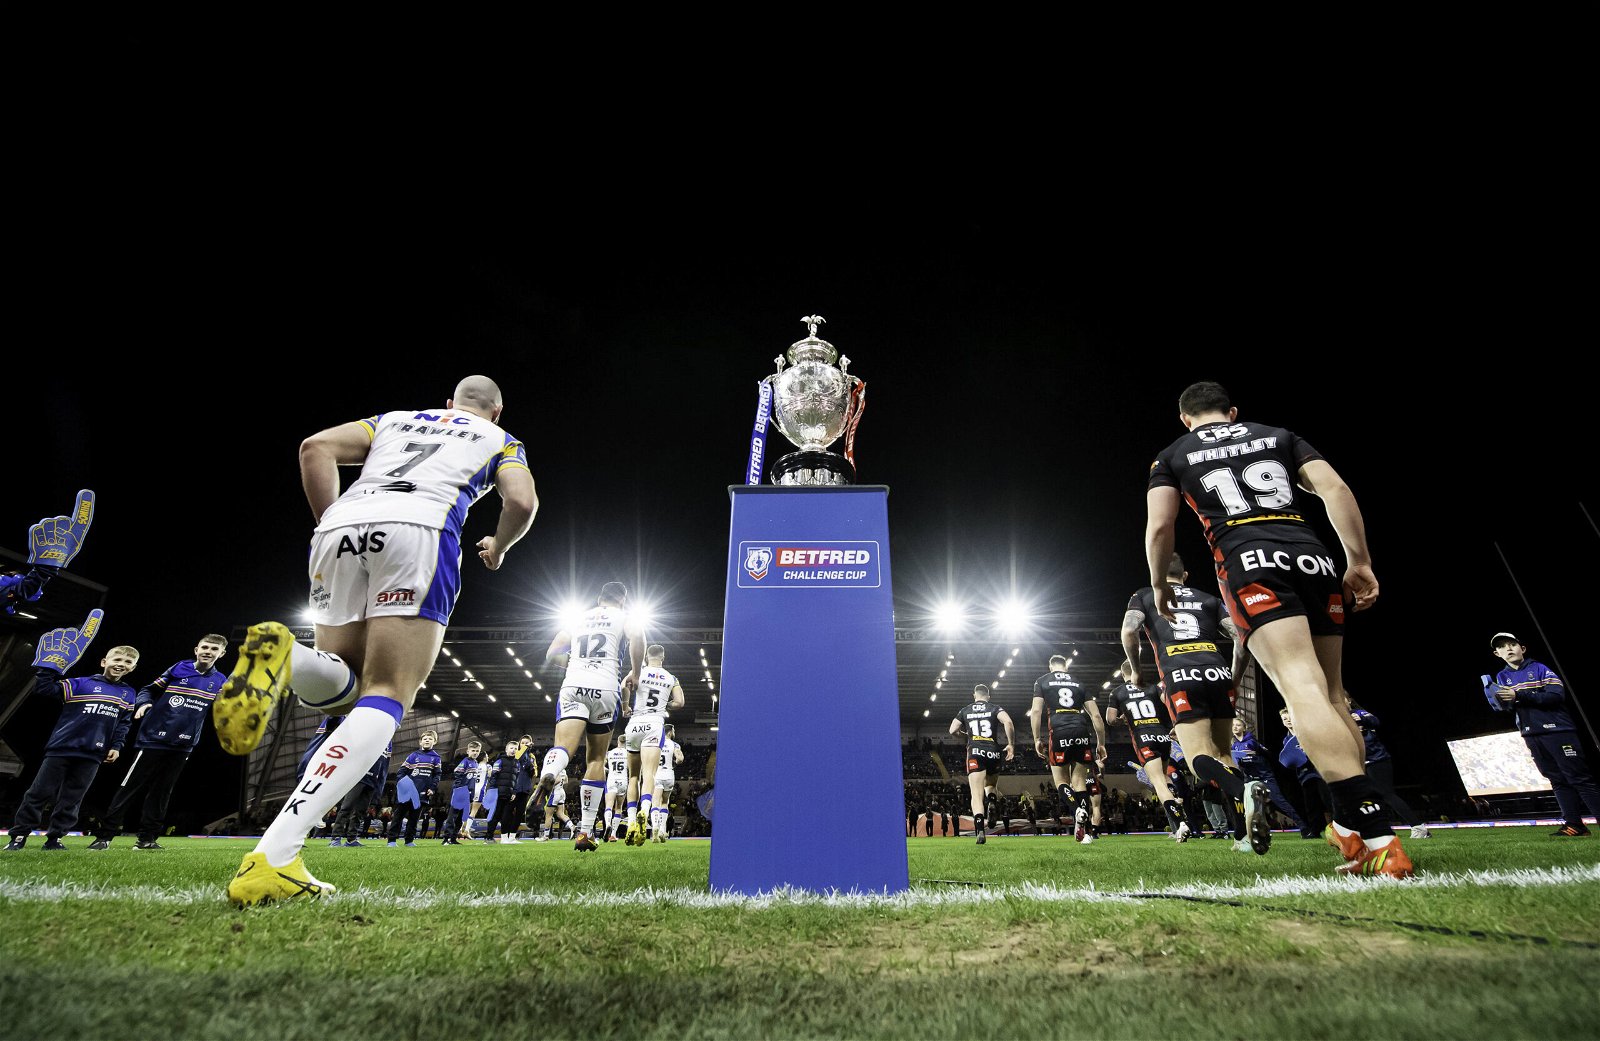 Leeds Rhinos and St Helens come out to the field of play past the Betfred Challenge Cup trophy at Headingley